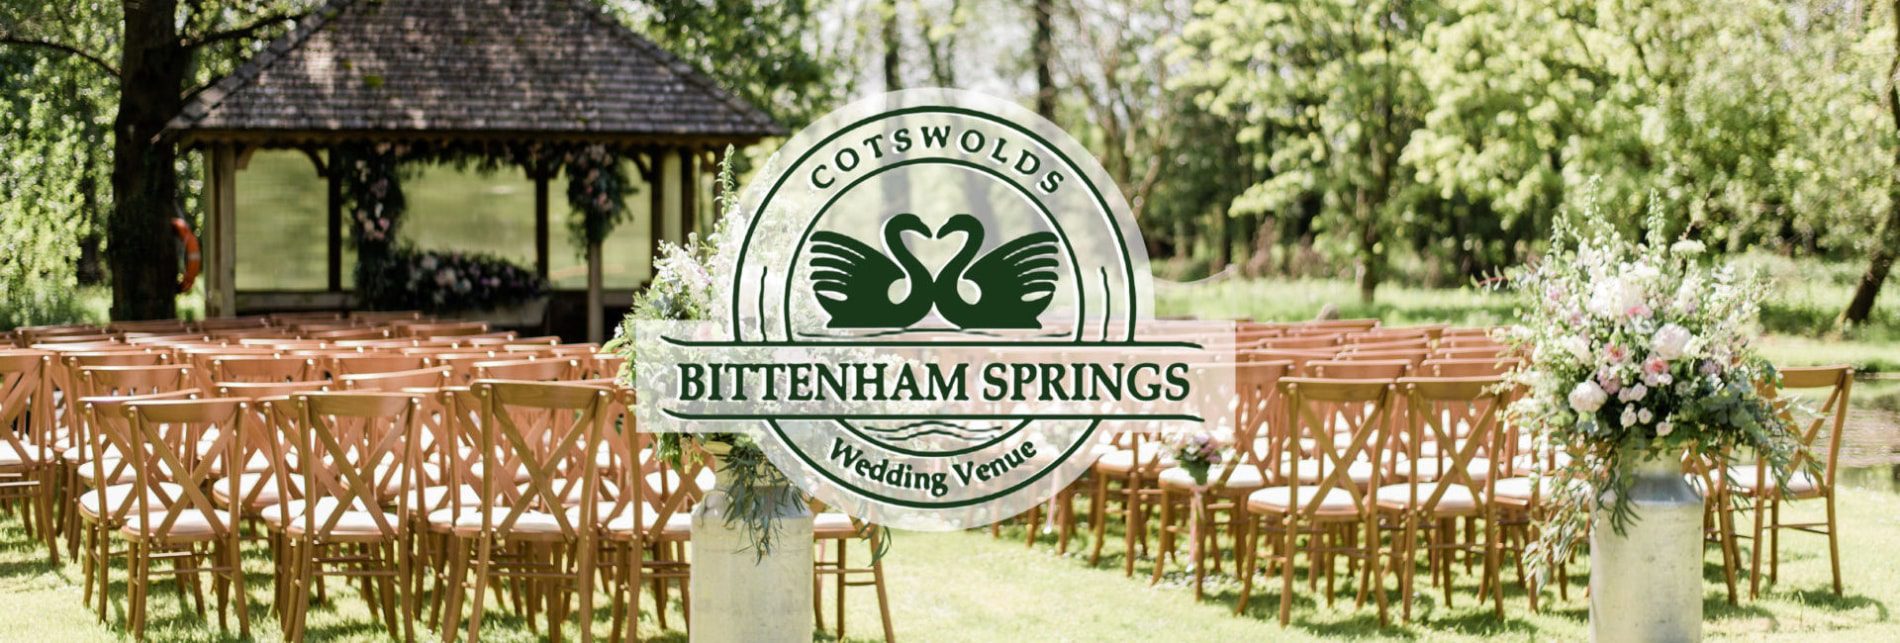 Planning Approval for Wedding Venue at Bittenham Springs thumbnail image